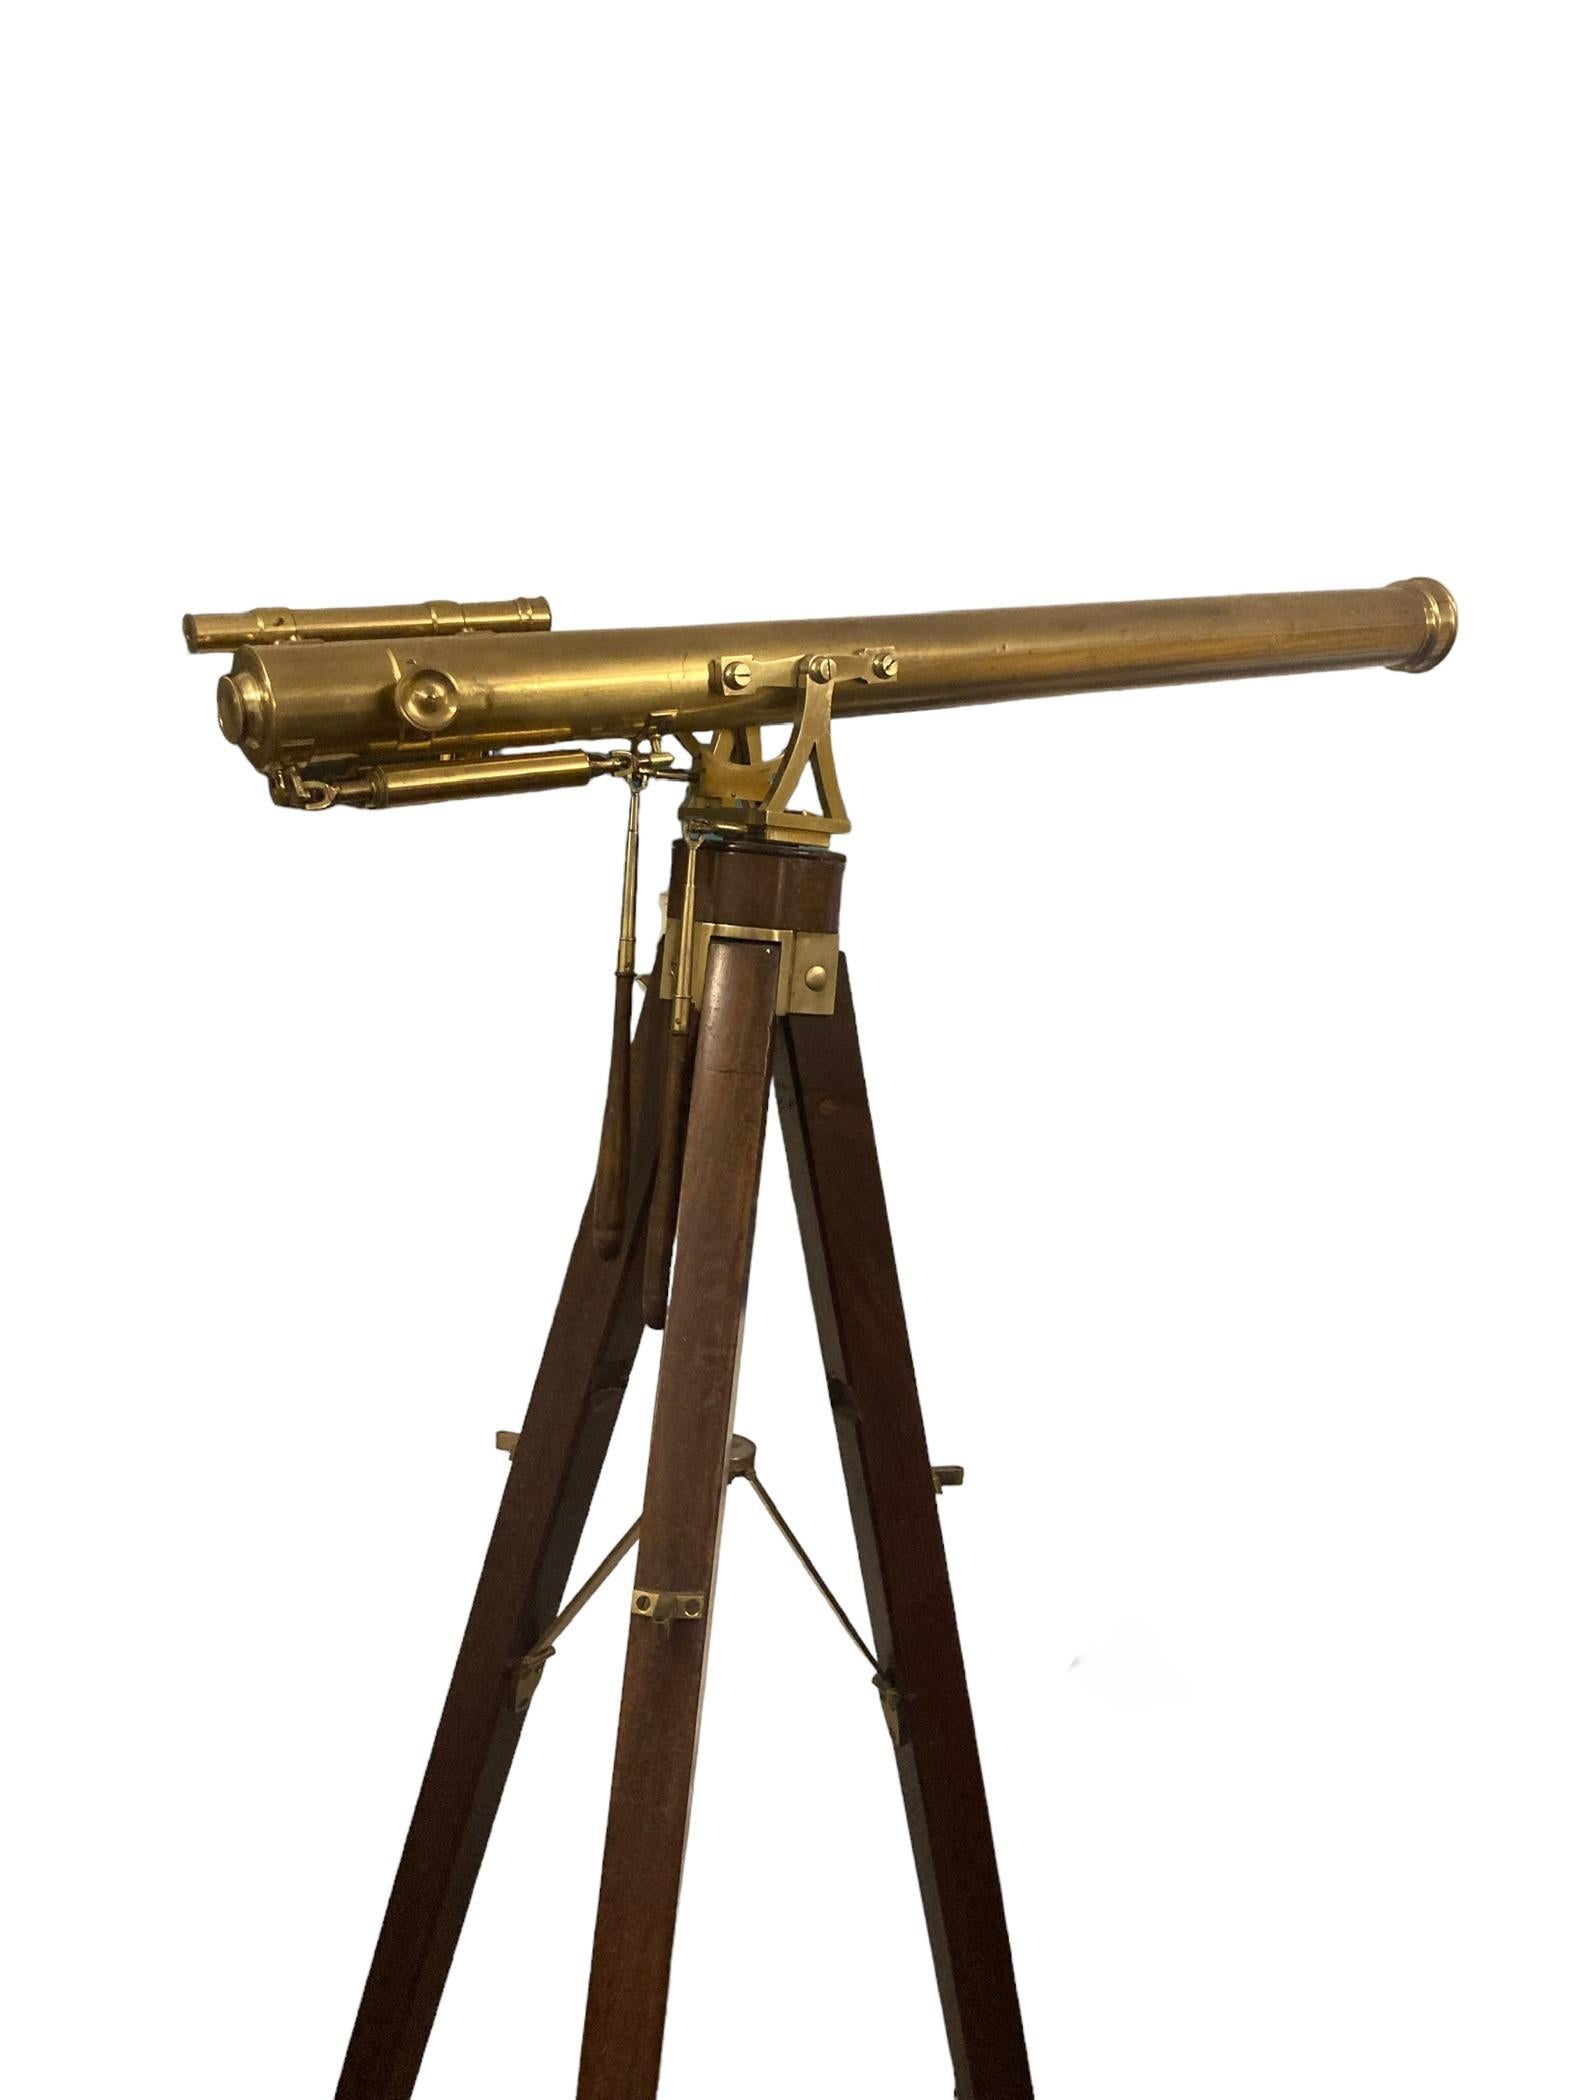 Large Antique Dolland & Co 1890 Brass Telescope with Mahogany box with accessories. This amazing historic telescope dating back to 1890 with original labelled case has all working accessories and has both working and ornamental value. Engraved brass